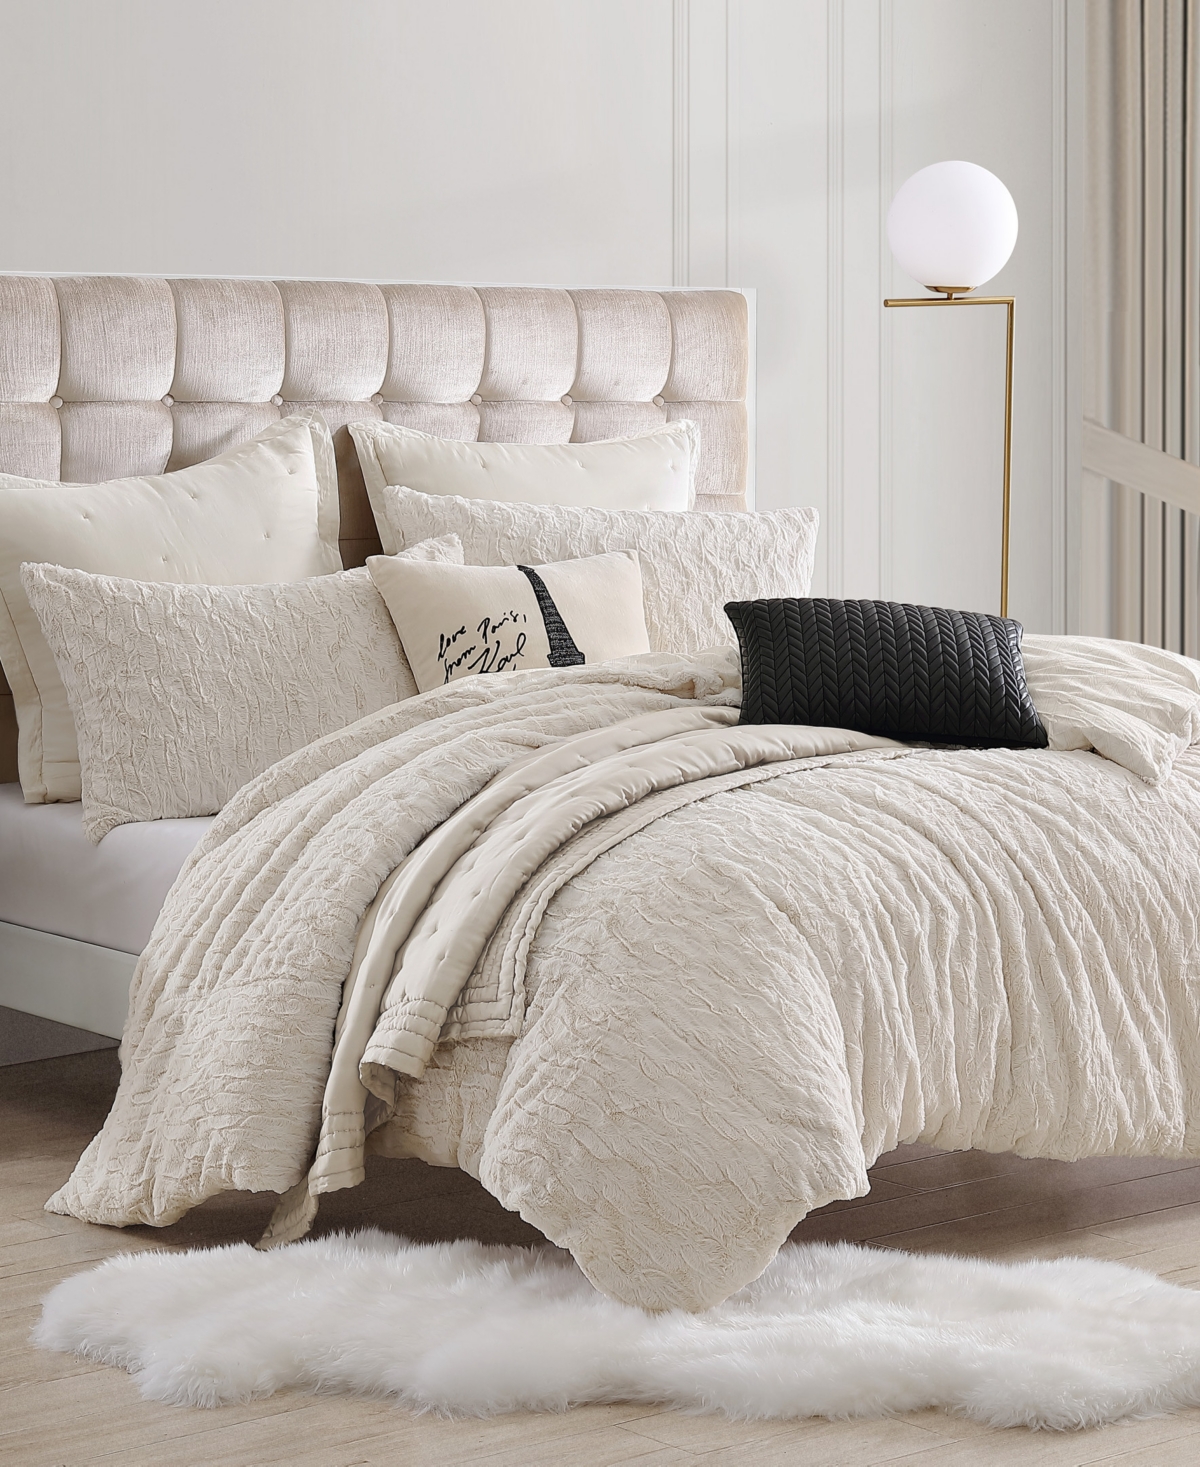 Karl Lagerfeld Soft And Warm Heavenly 3 Piece Duvet Cover Set, King Bedding In Ivory